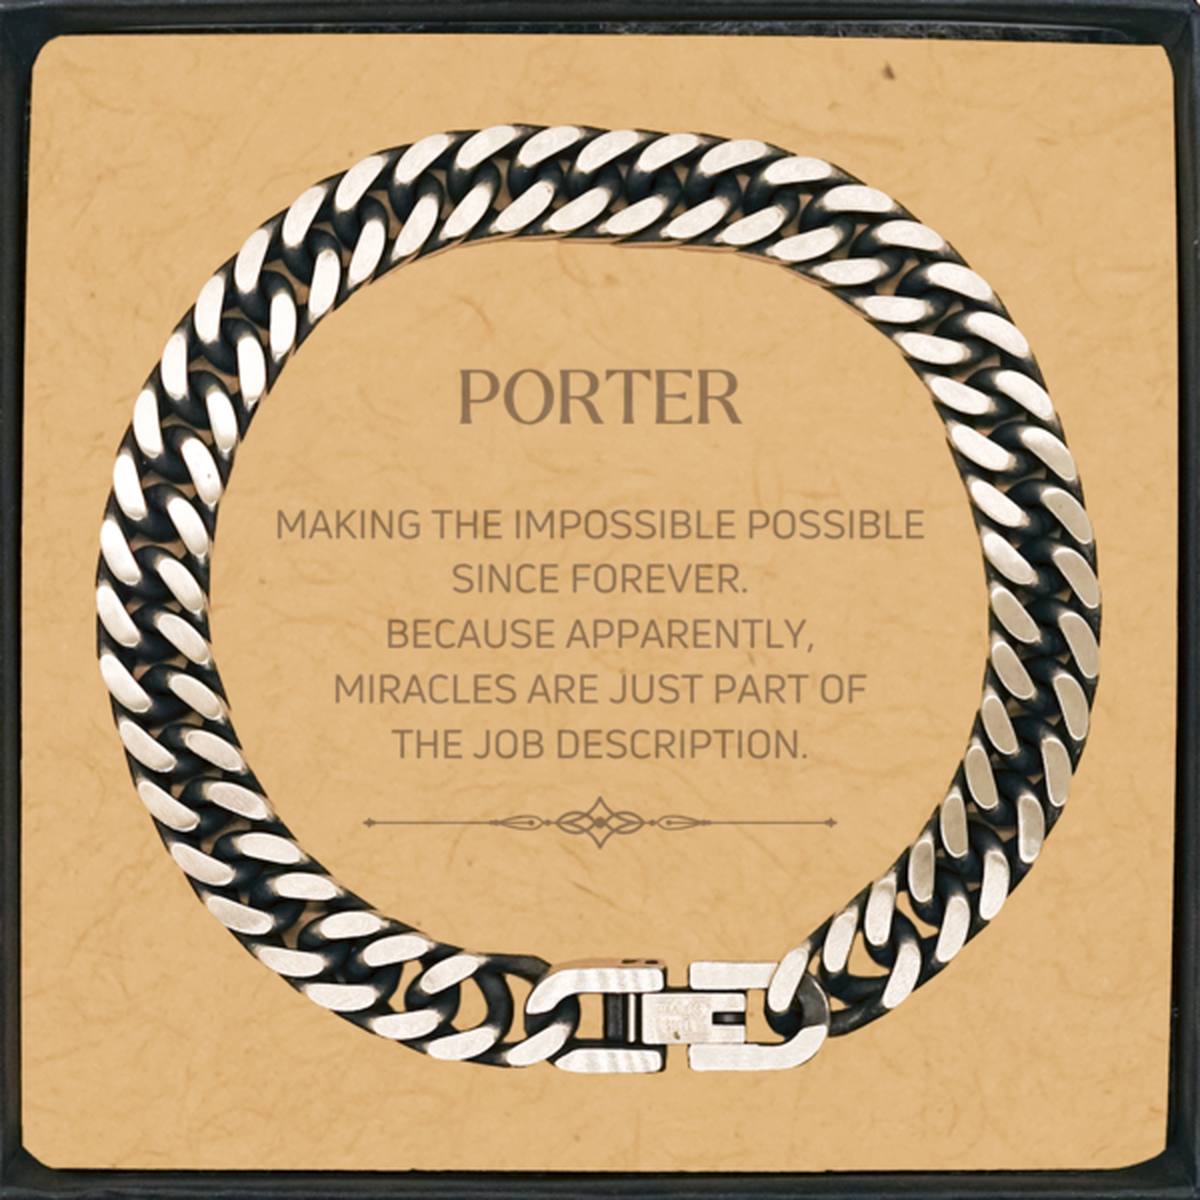 Funny Porter Gifts, Miracles are just part of the job description, Inspirational Birthday Cuban Link Chain Bracelet For Porter, Men, Women, Coworkers, Friends, Boss